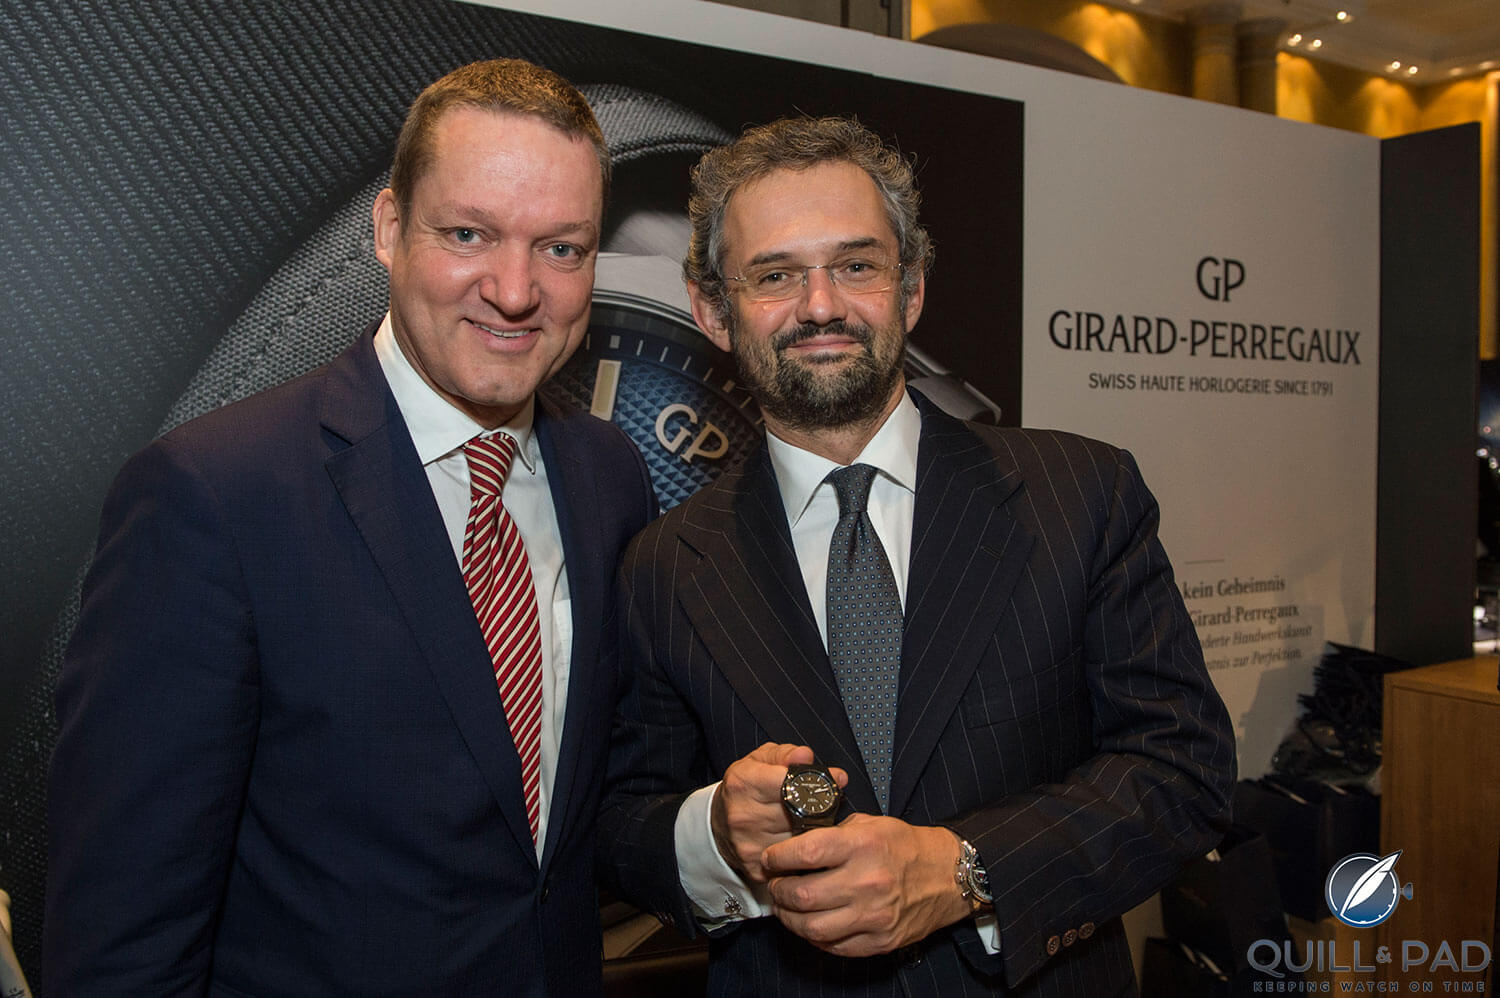 Girard Perregaux's Axel Felmy with Stefano Macaluso holding the Laureato Ceramic at Munichtime 2017